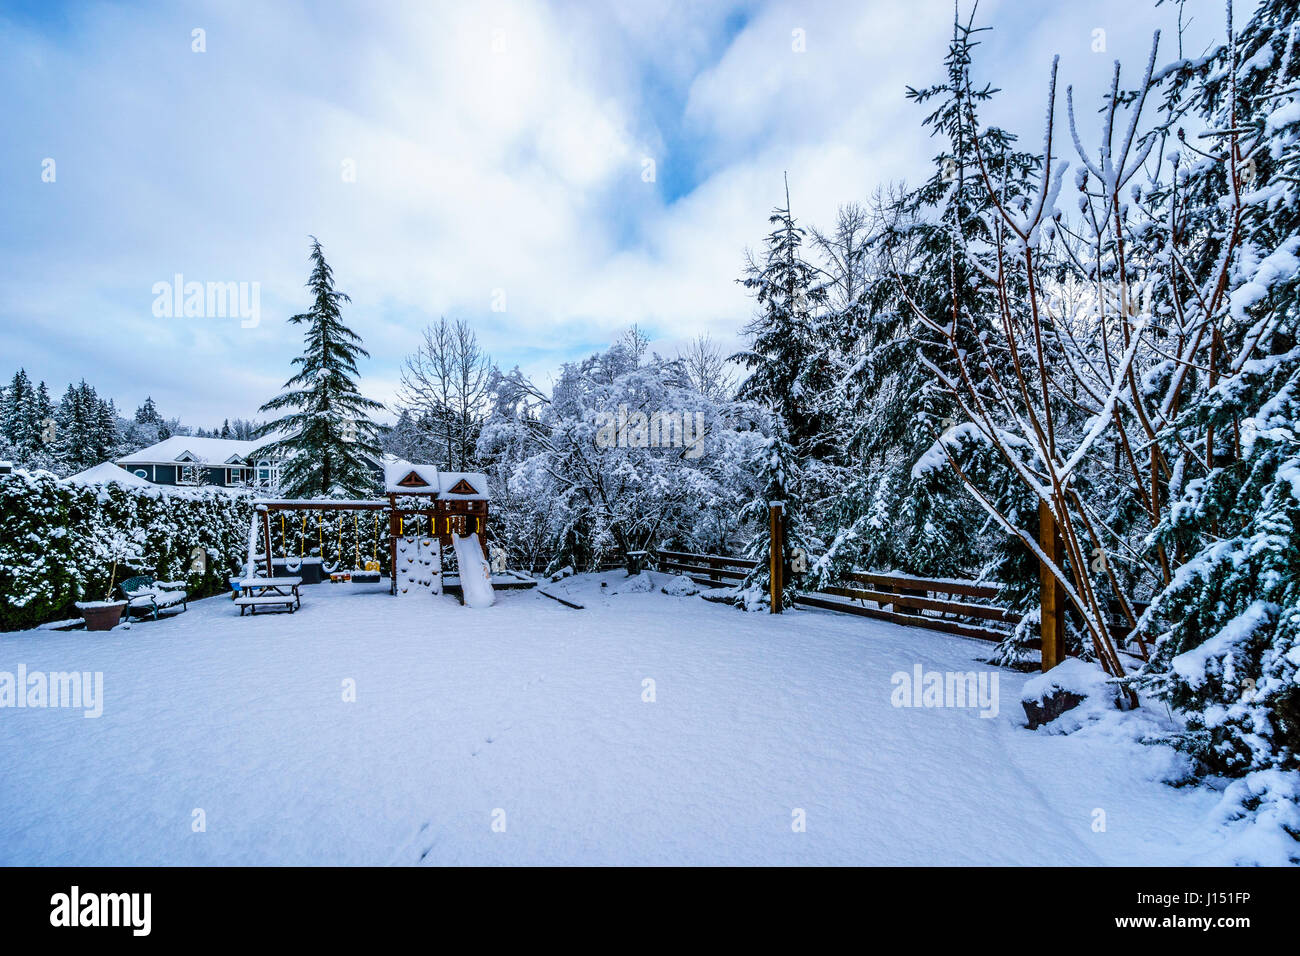 Playground in a winter landscape backyard set in the Fraser Valley of British Columbia, Canada Stock Photo